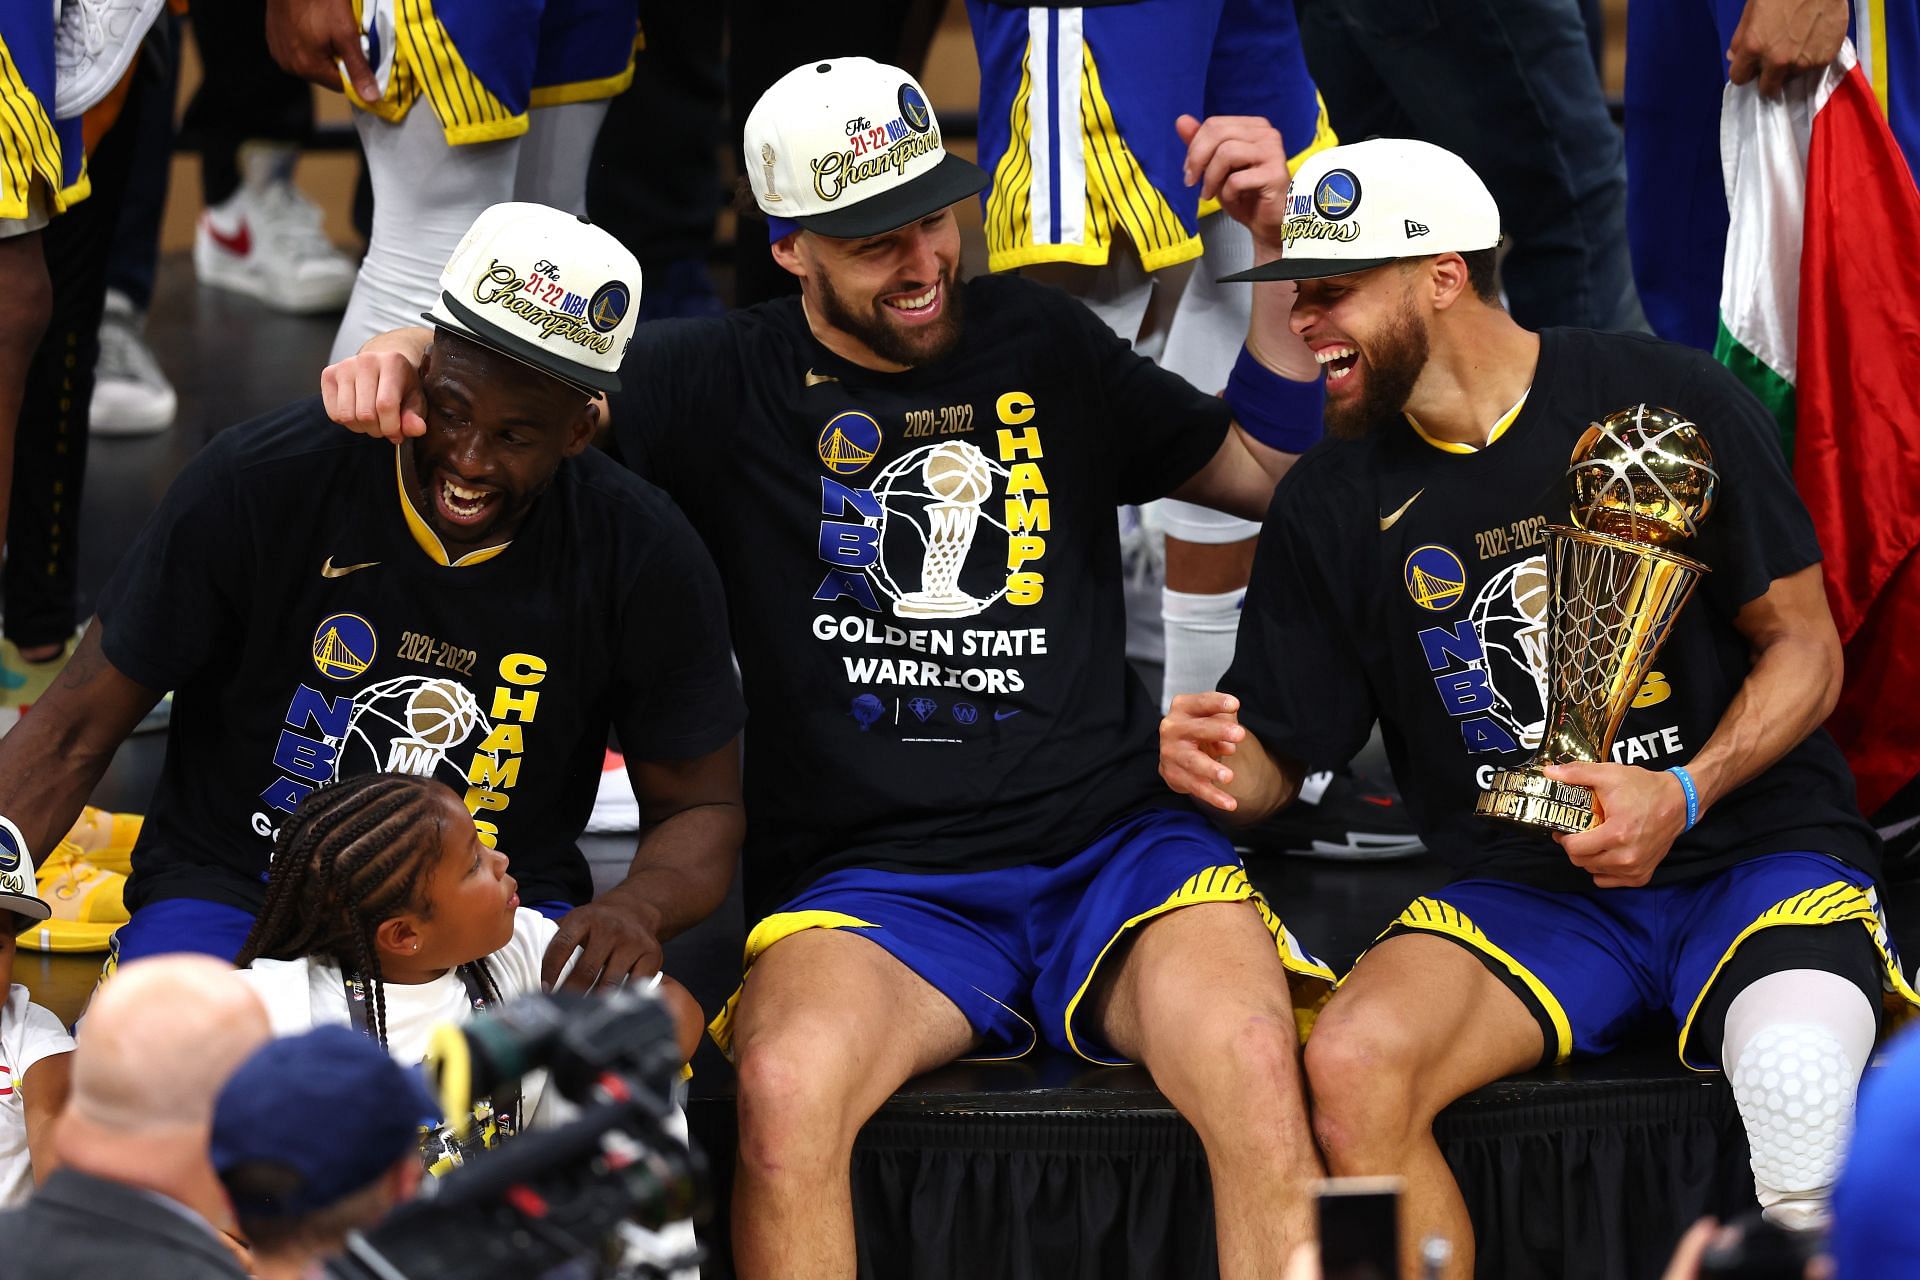 Draymond Green, Klay Thompson and Steph Curry of the Golden State Warriors after winning the 2022 NBA Finals